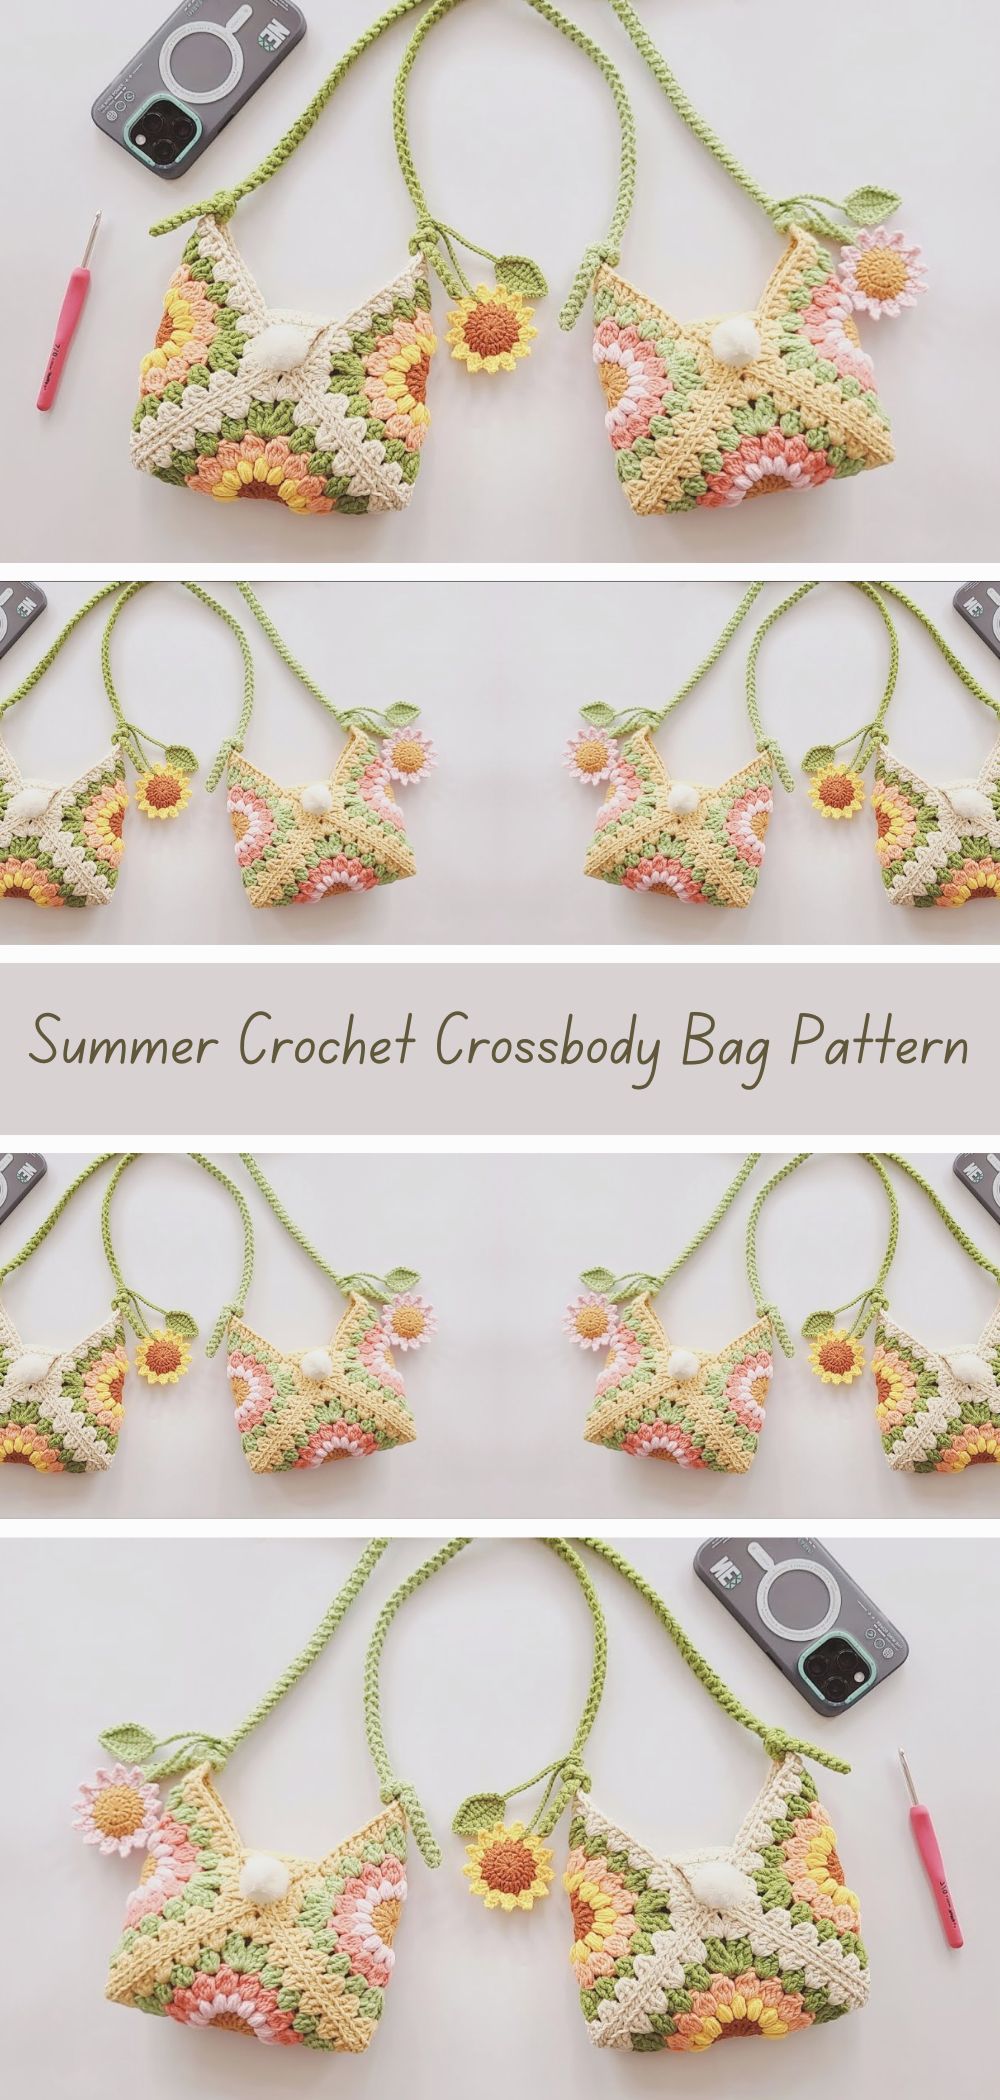 Summer Crochet Crossbody Bag Pattern - Create a trendy and practical crochet bag perfect for sunny days with this stylish pattern